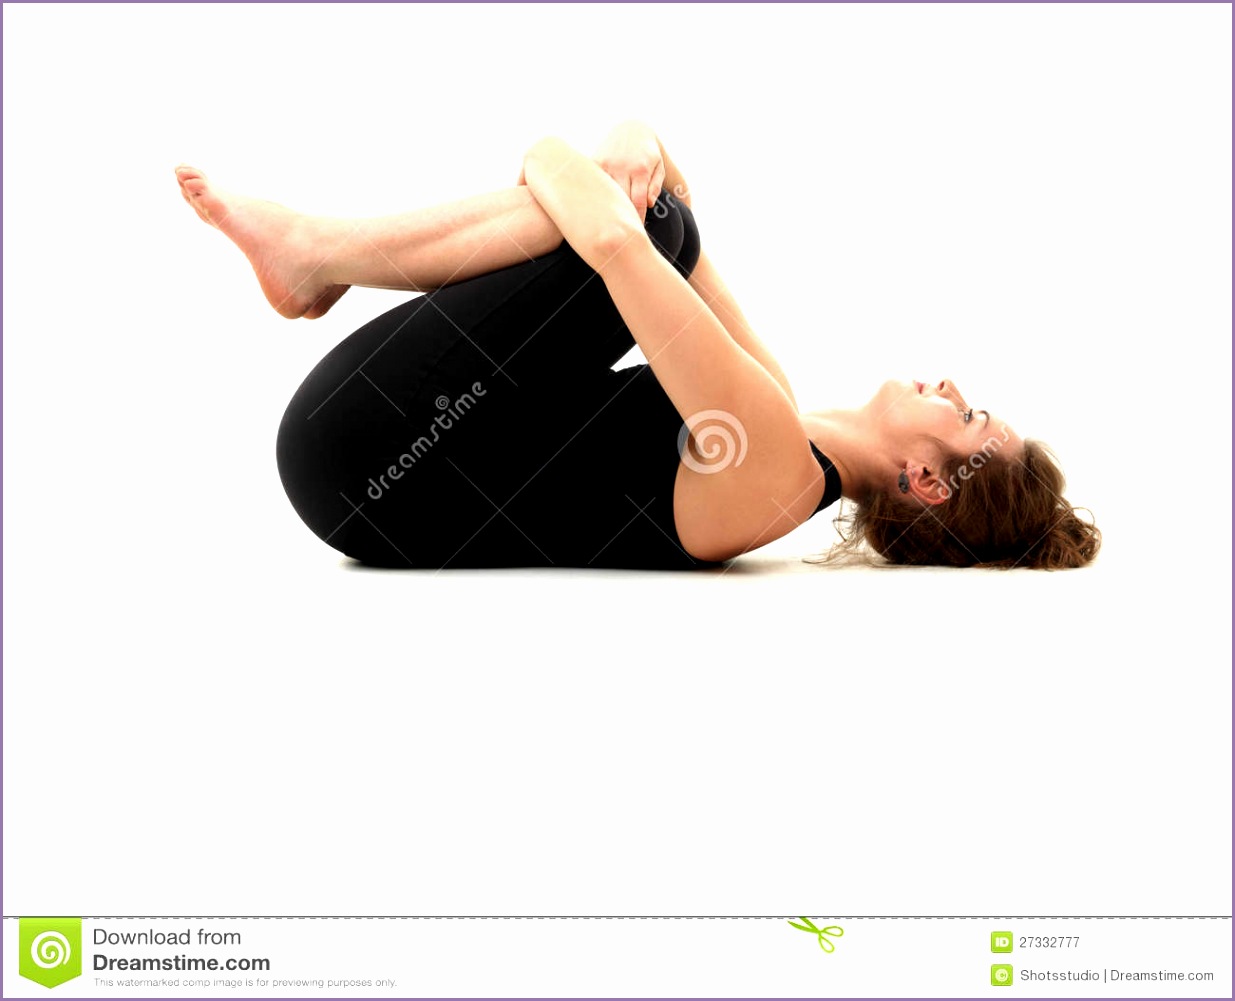 royalty free stock photography relaxing yoga pose image